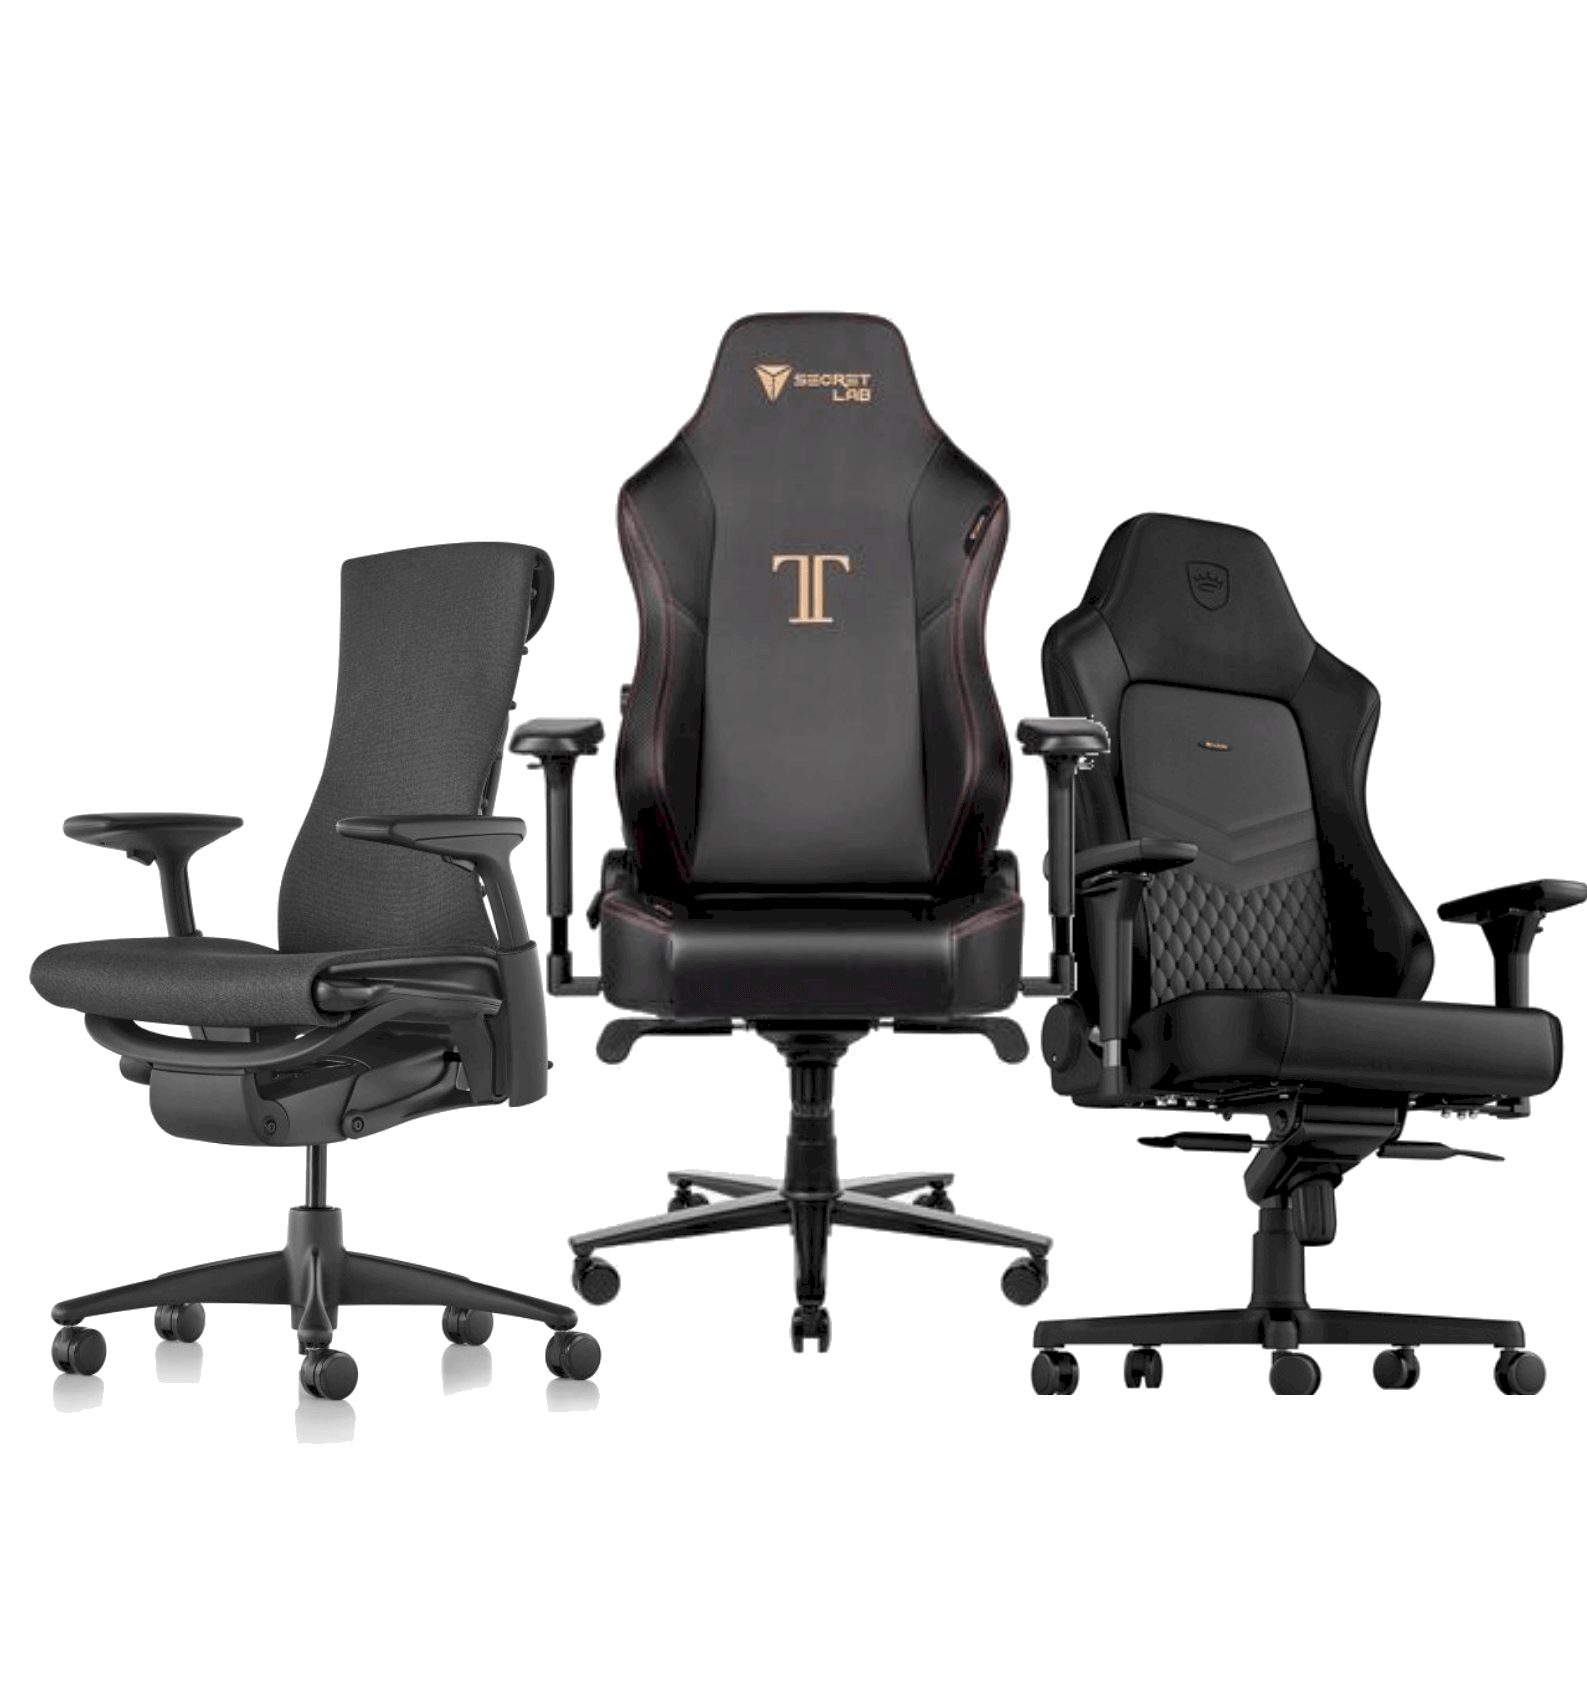 Best Gaming Chair - The Ultimate Guide